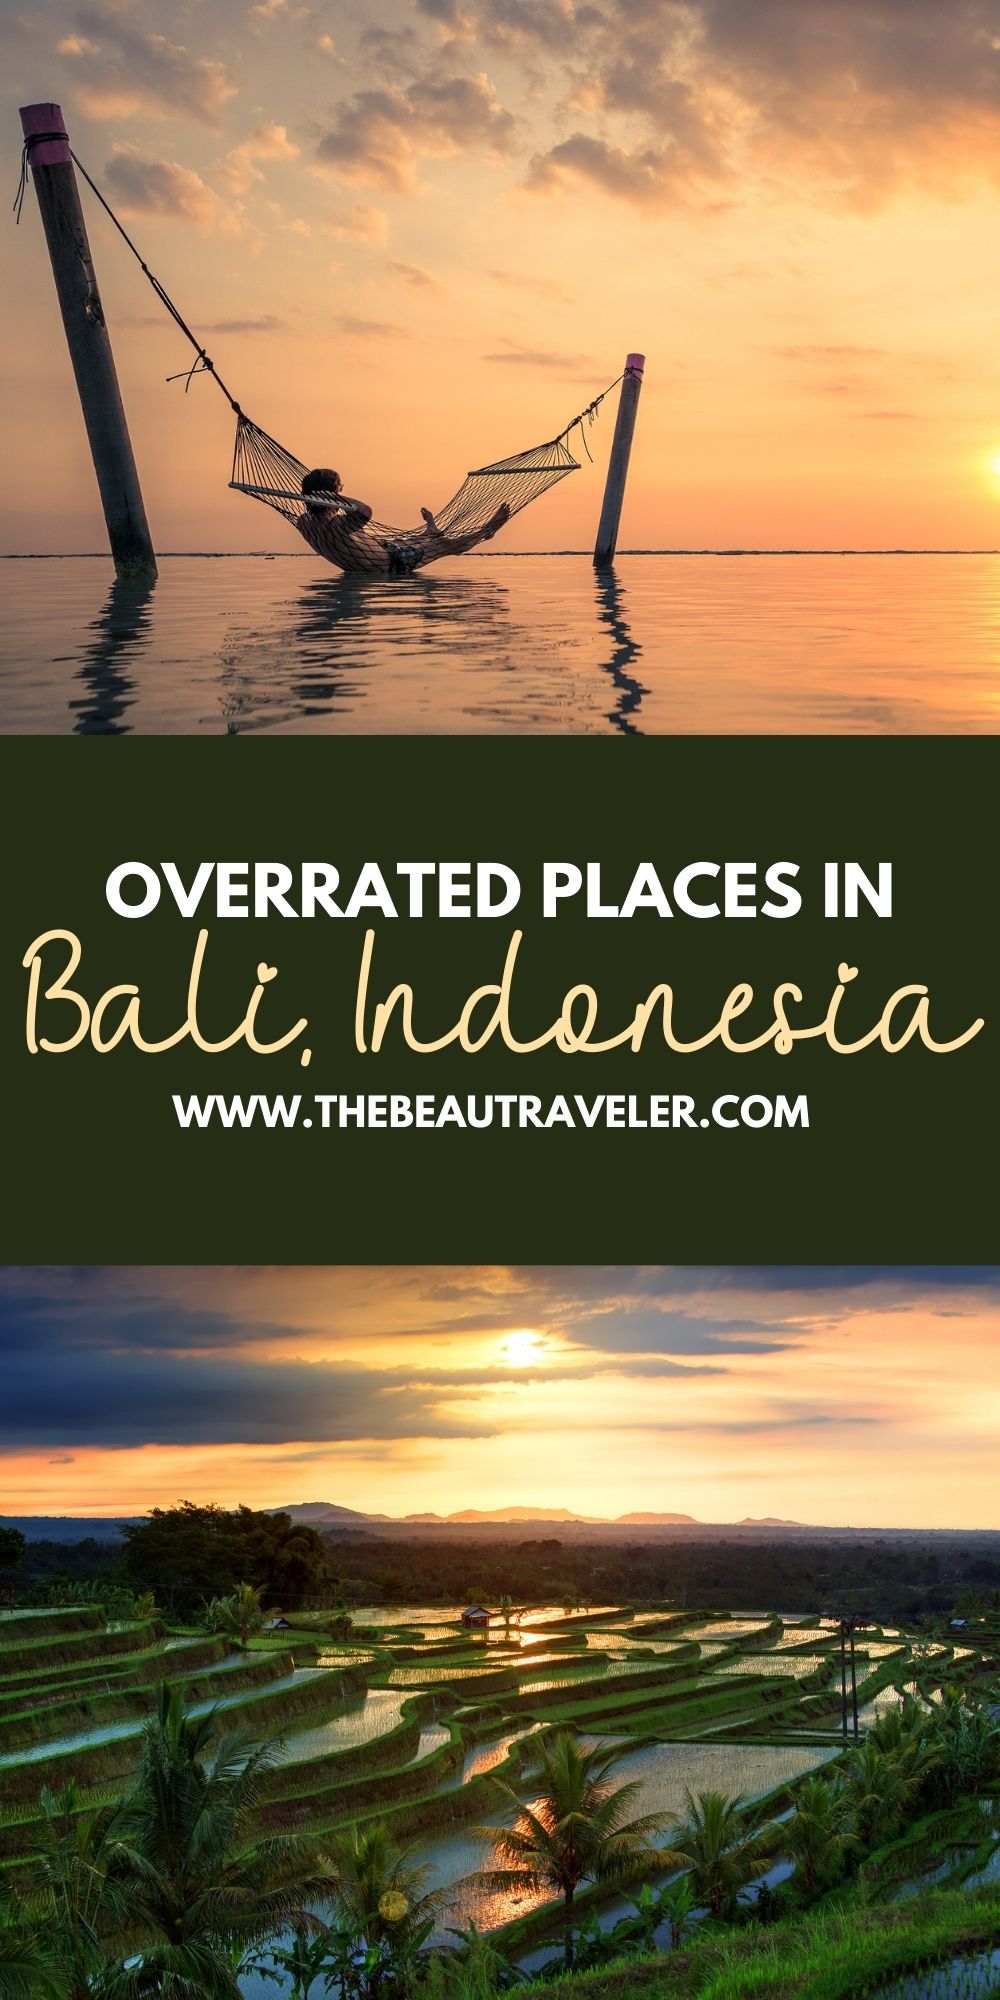 Overrated Places in Bali